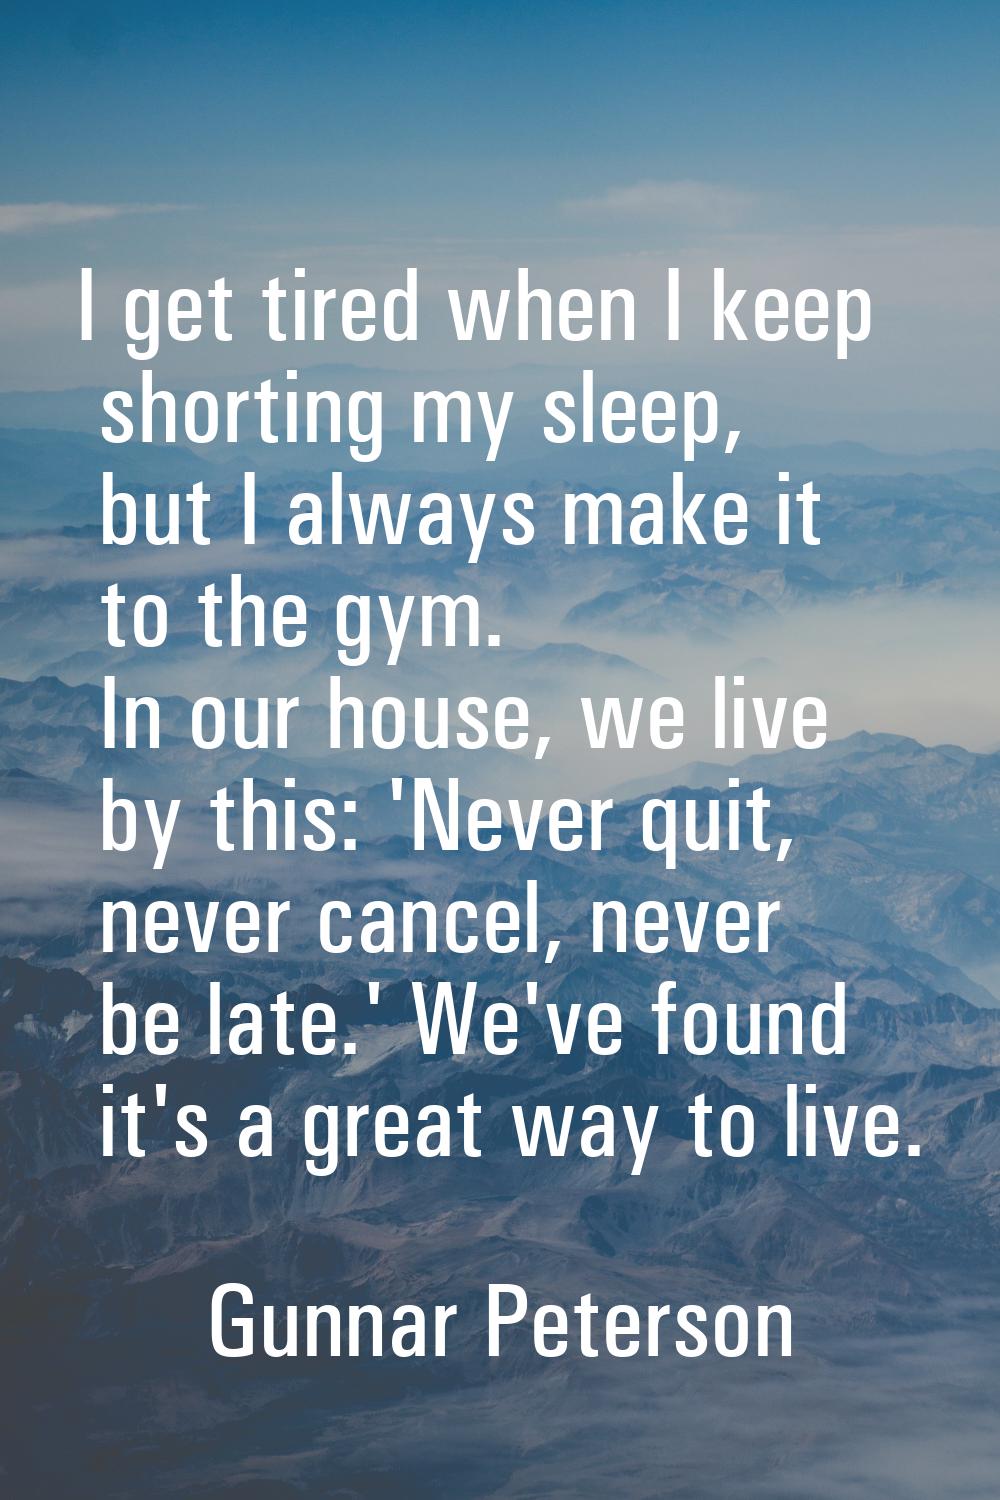 I get tired when I keep shorting my sleep, but I always make it to the gym. In our house, we live b